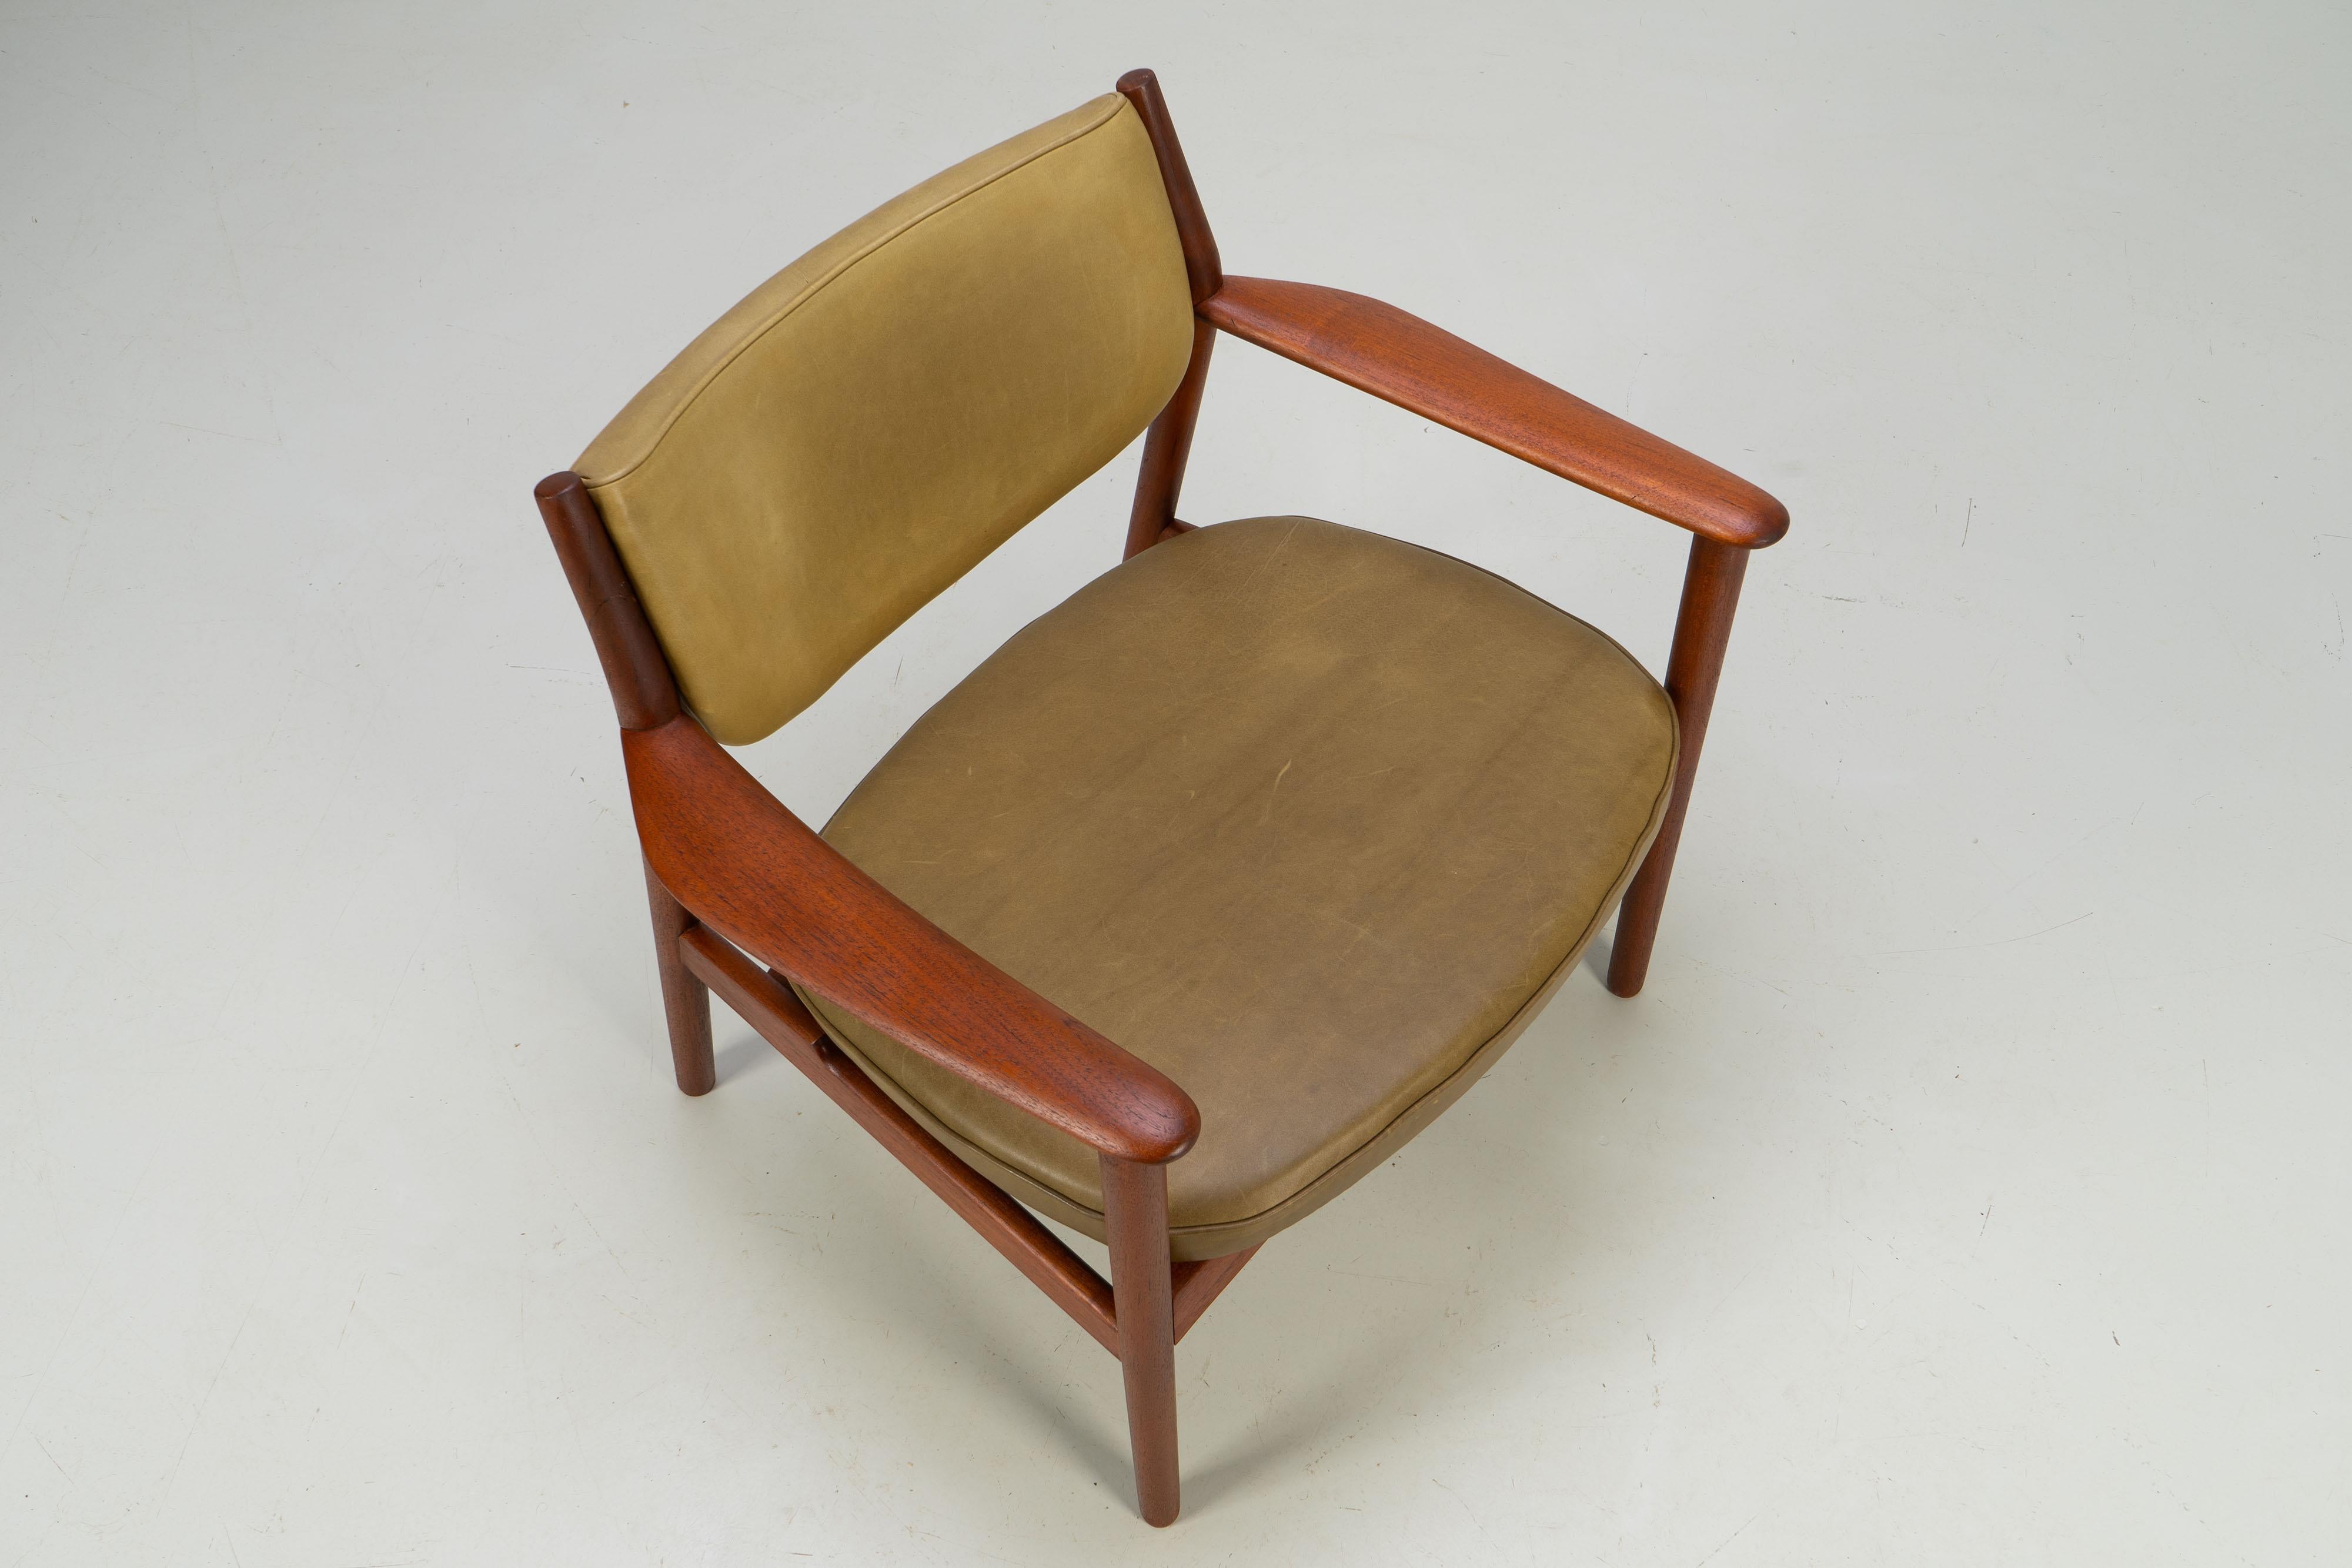 Pair of Scandinavian Easy Chairs with Teak and Leather by Westnofa, 1960s For Sale 3